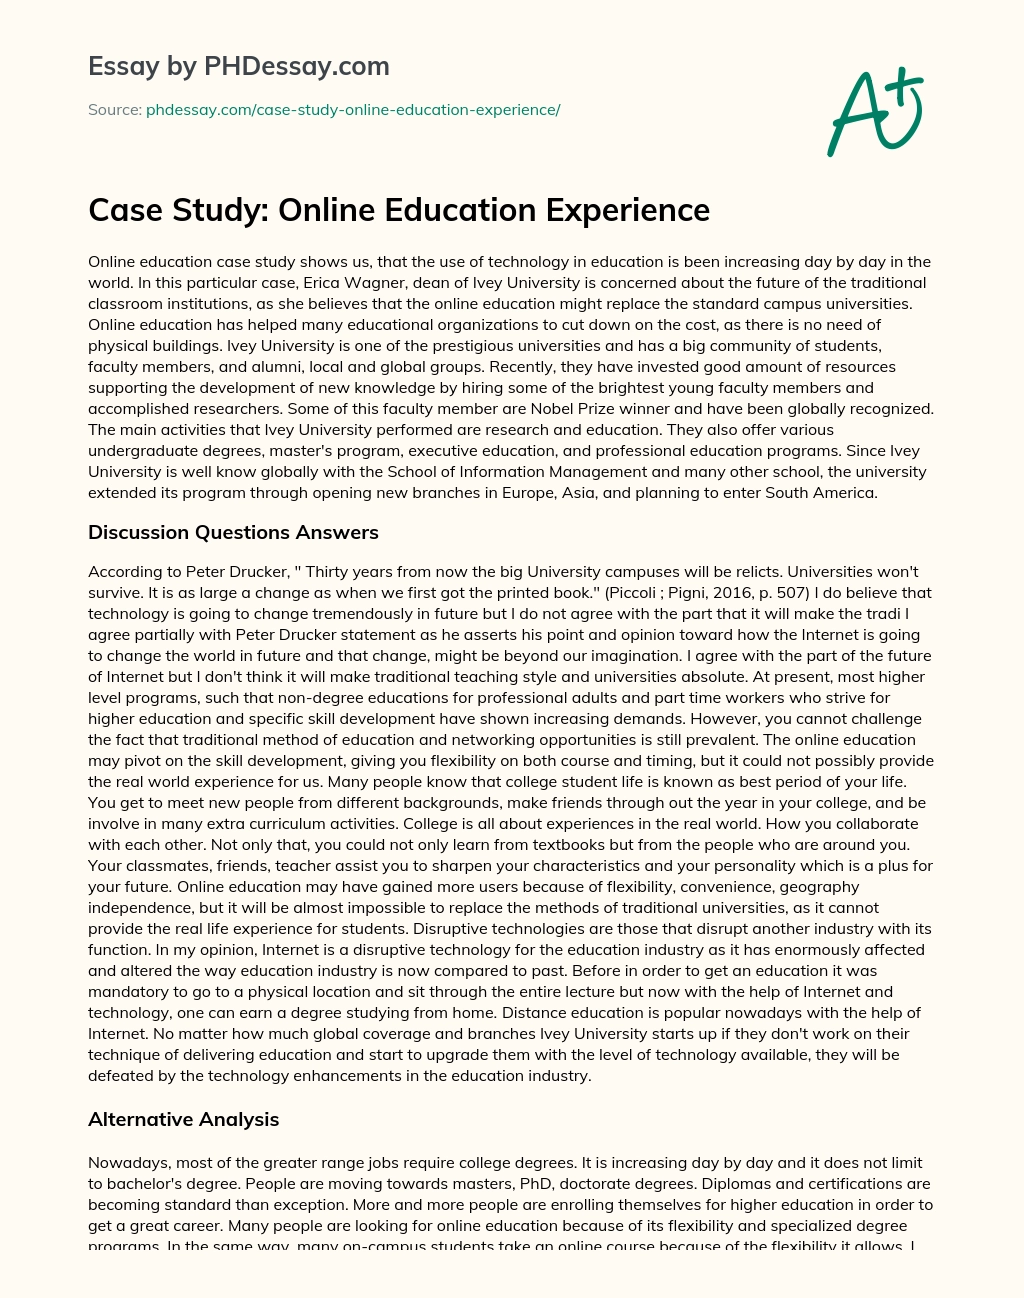 Case Study: Online Education Experience essay